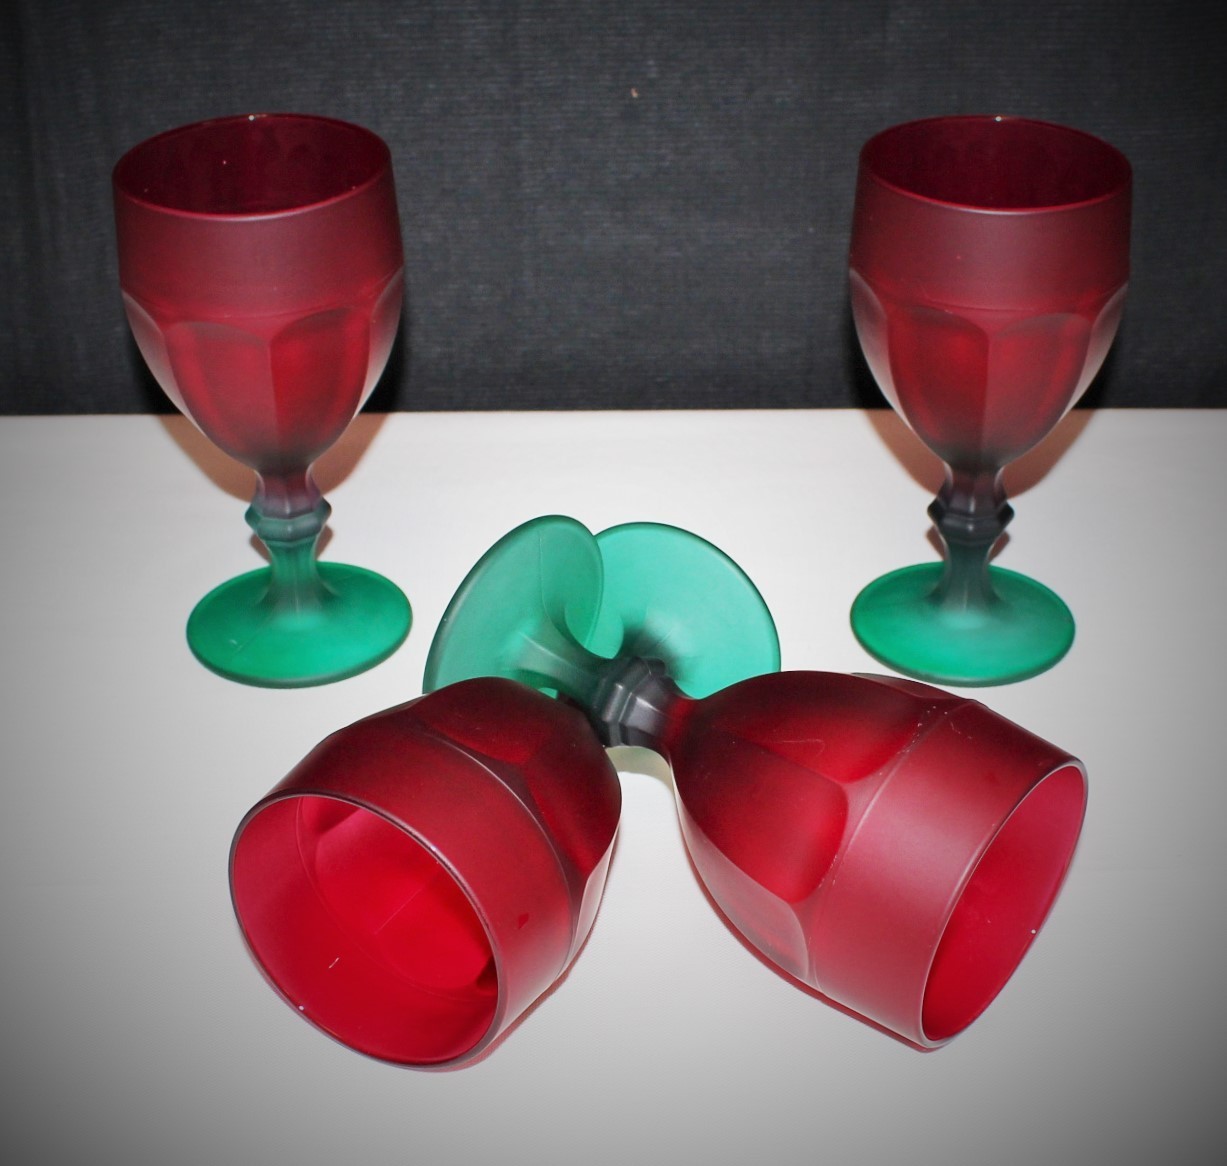 Set of 4 Libbey Duratuff Frosted Red/Green Satin Finish 6 3/4